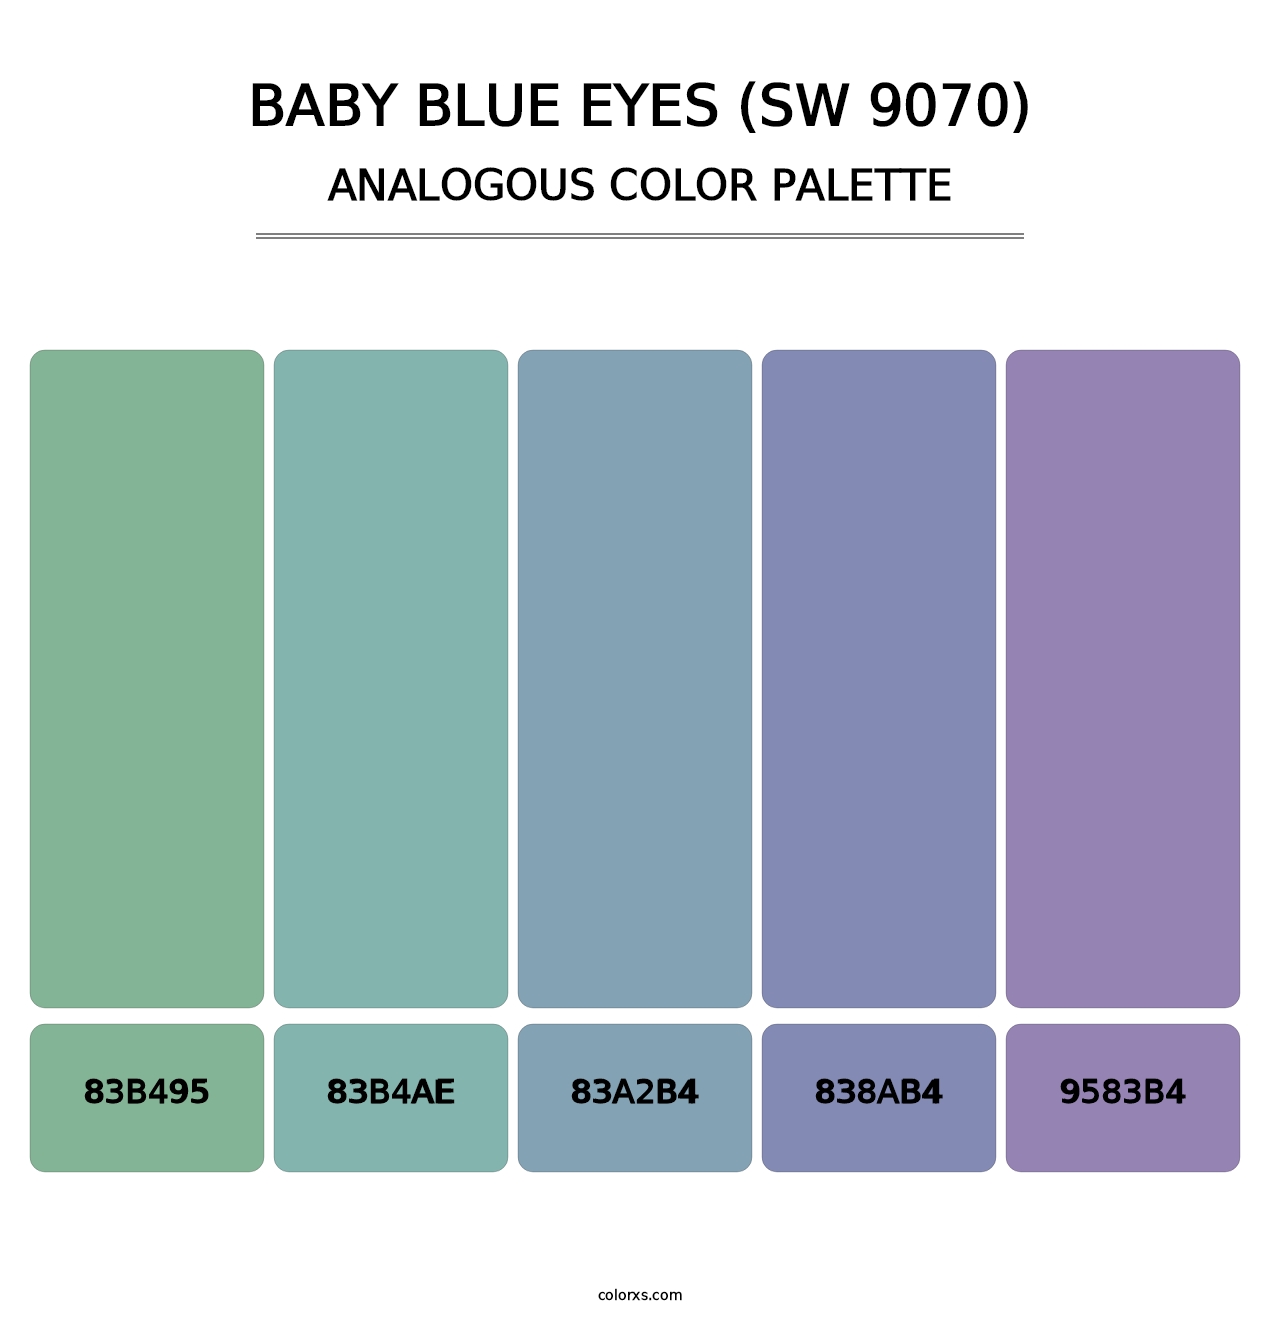 Baby Blue Eyes (SW 9070) - Analogous Color Palette